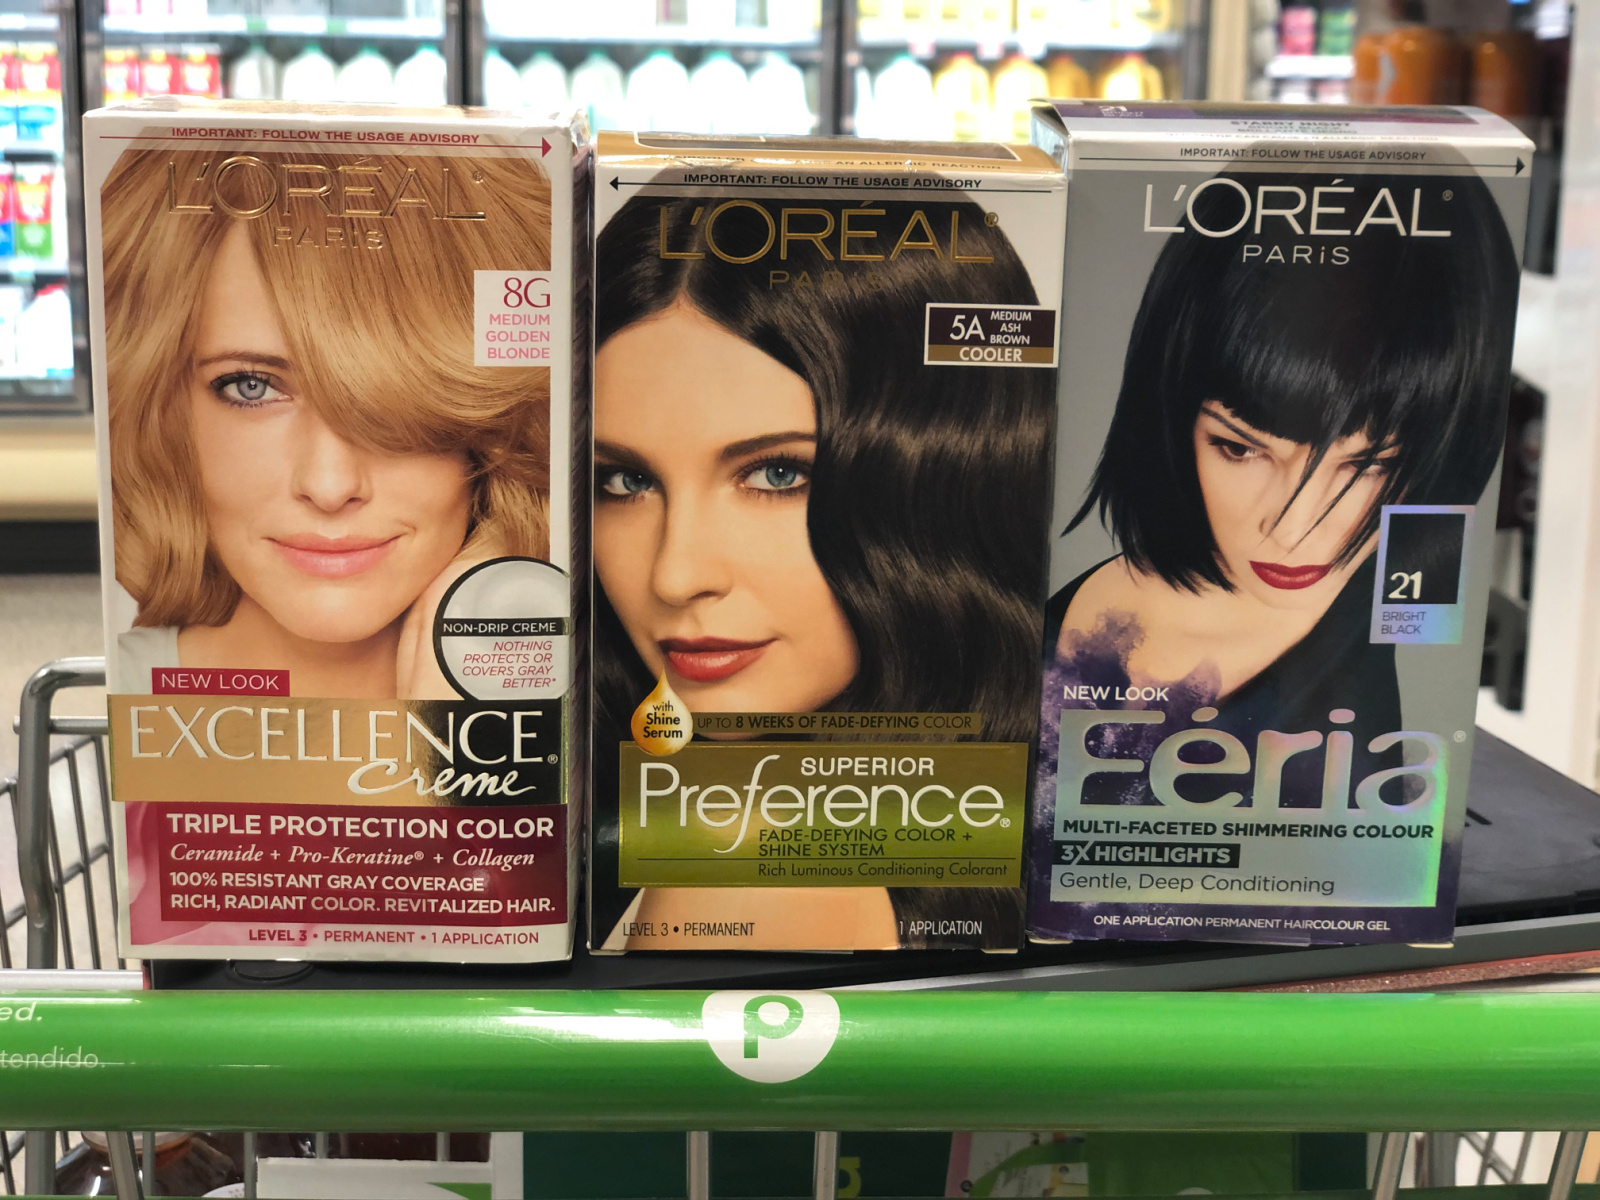 L’Oreal Paris Preference, Excellence, or Feria Hair Color Just $6.49 At Publix (Regular Price $11.99)